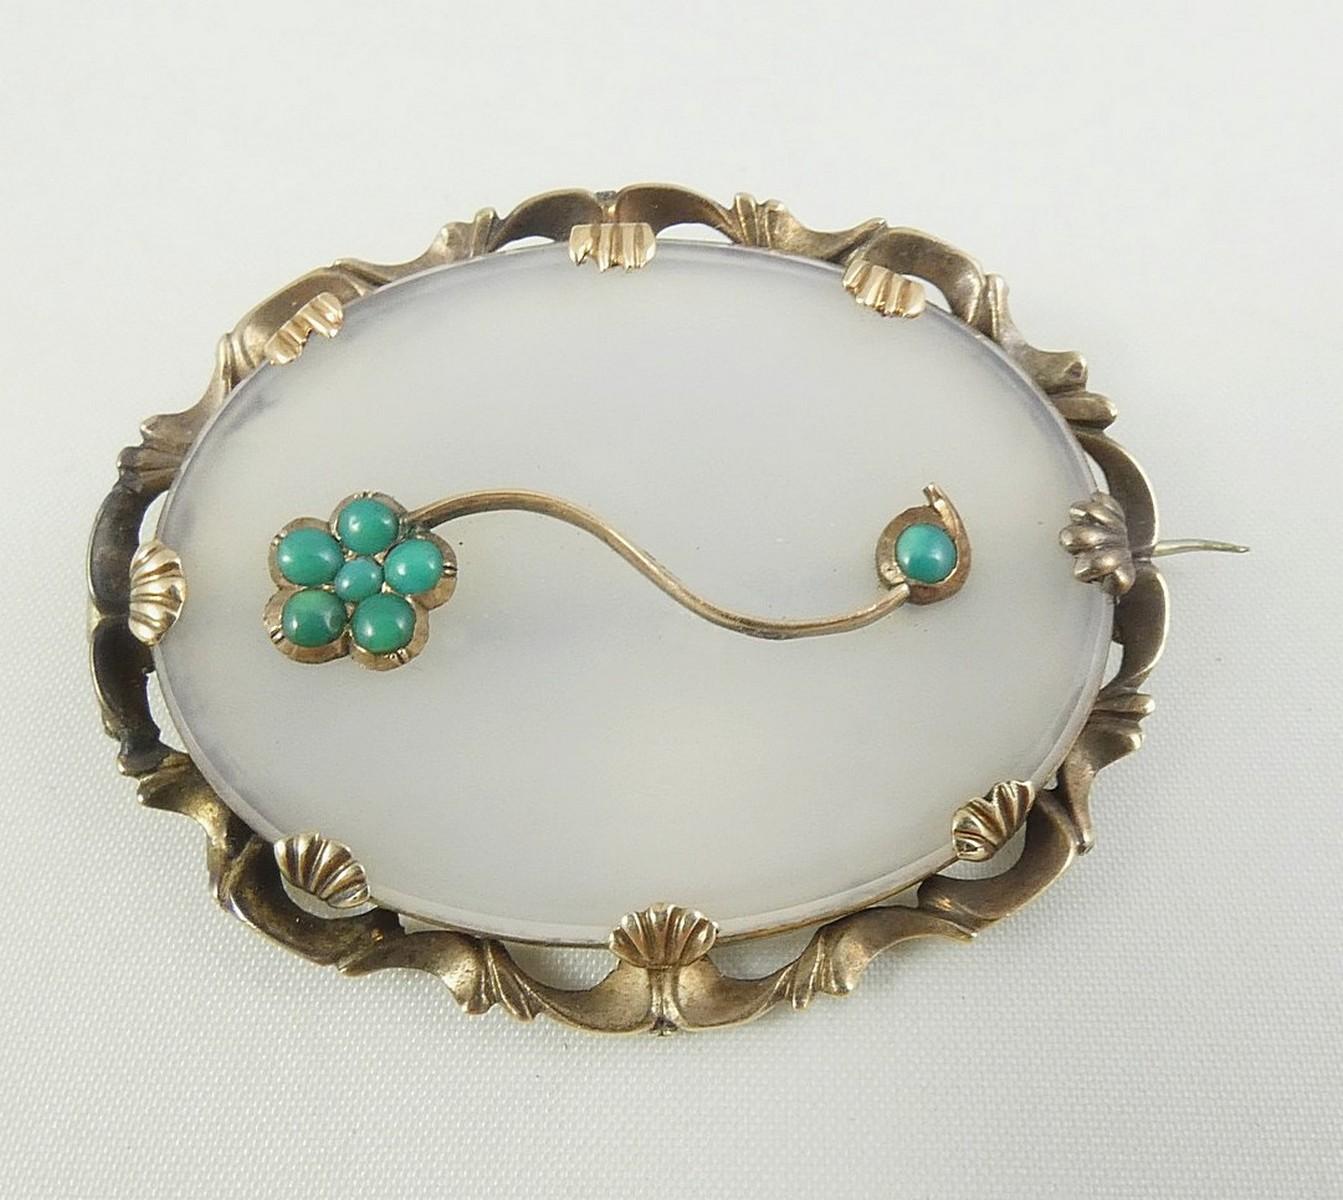 ANTIQUE OVAL BROOCH